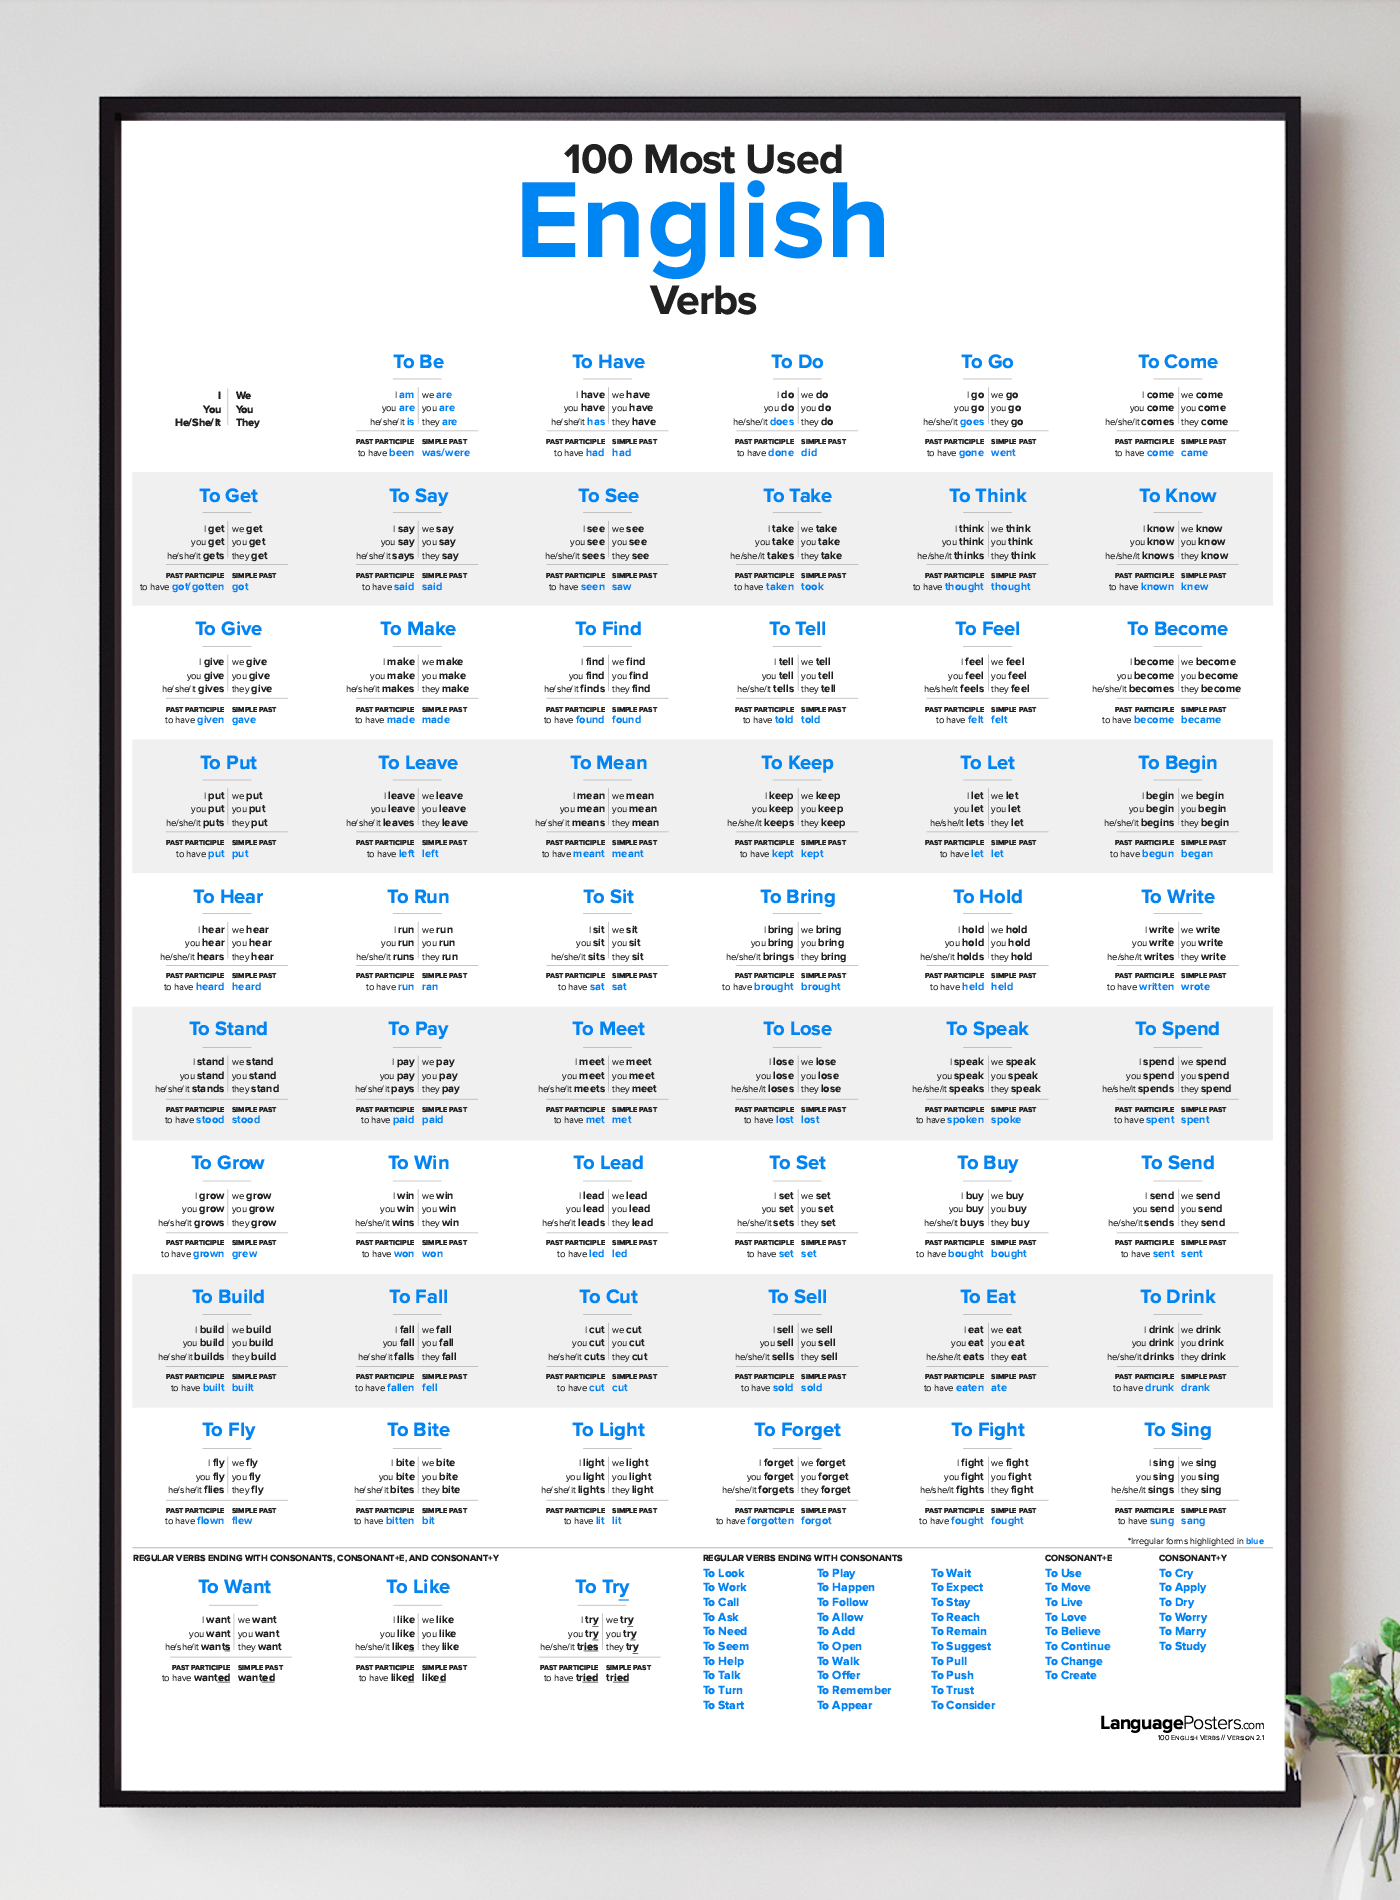 100 Most Used English Verbs Poster – LanguagePosters.com